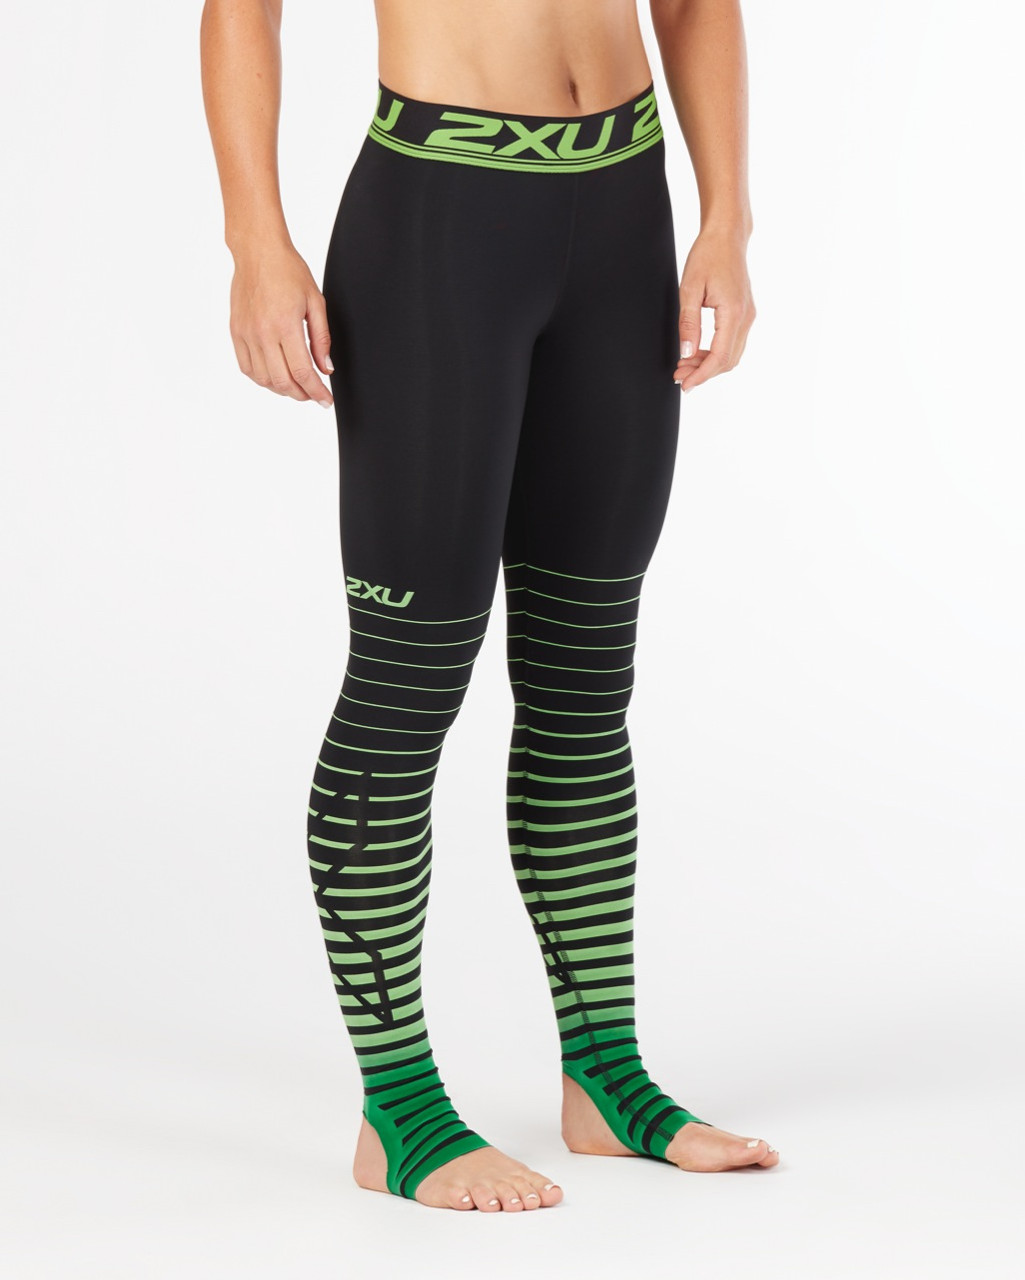 Power Recovery Compression Tights, 44% OFF